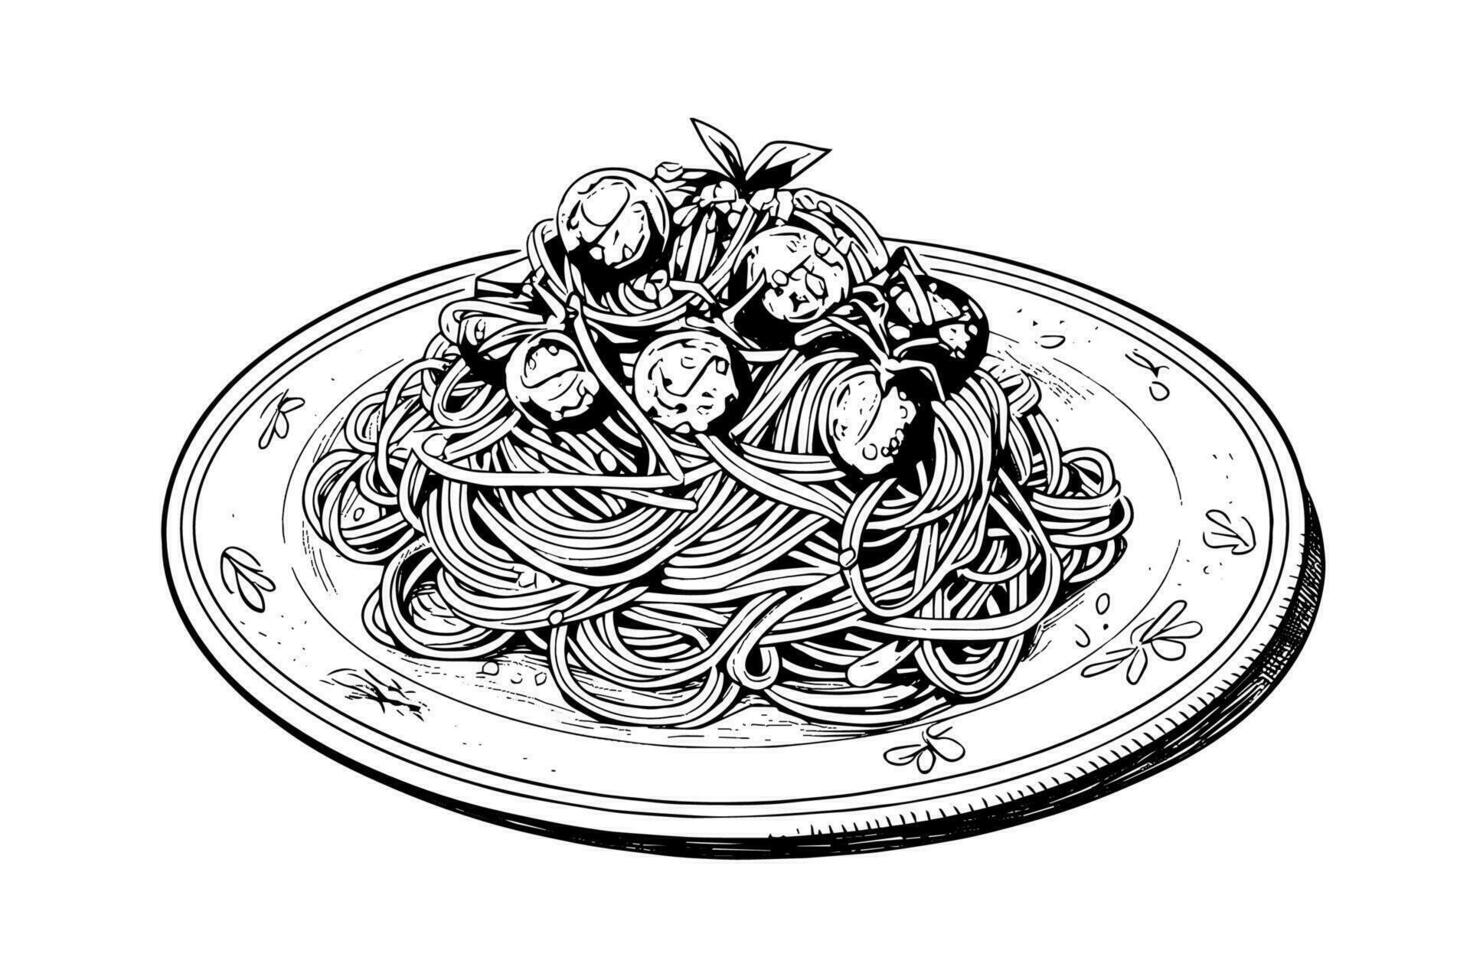 Italian pasta. Spaghetti on a plate, fork with spaghetti Vector engraving style illustration.